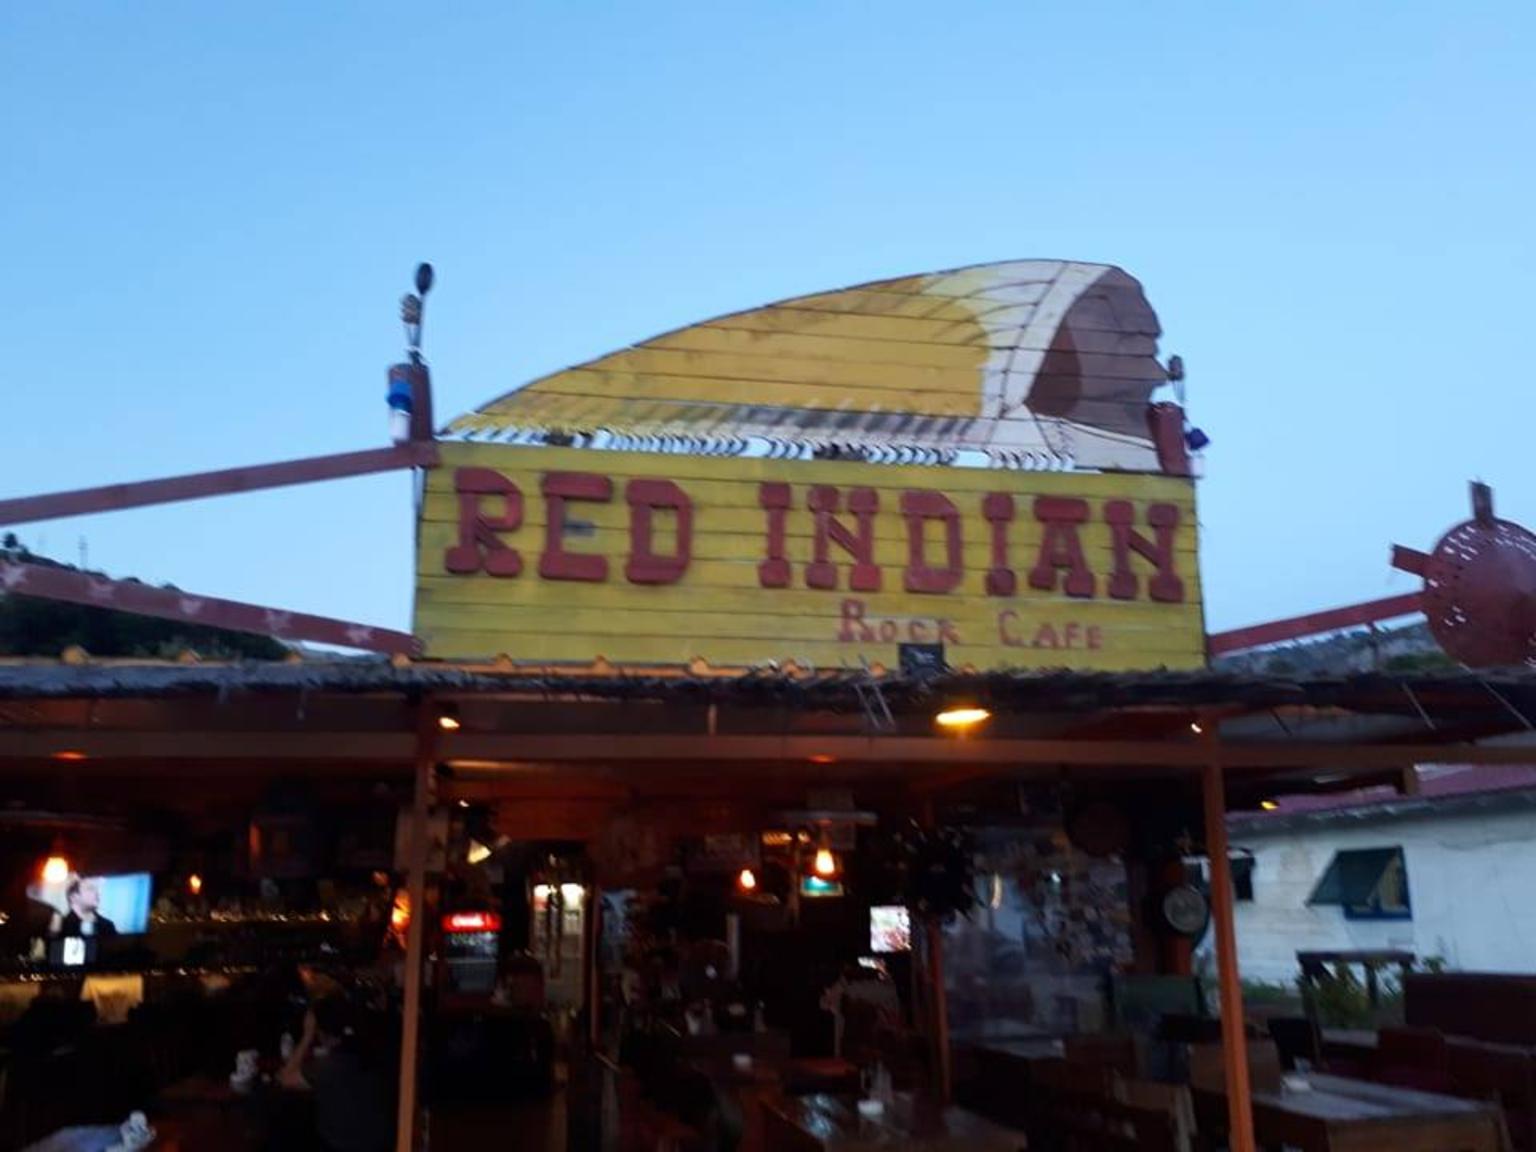 Red Indian Rock Cafe